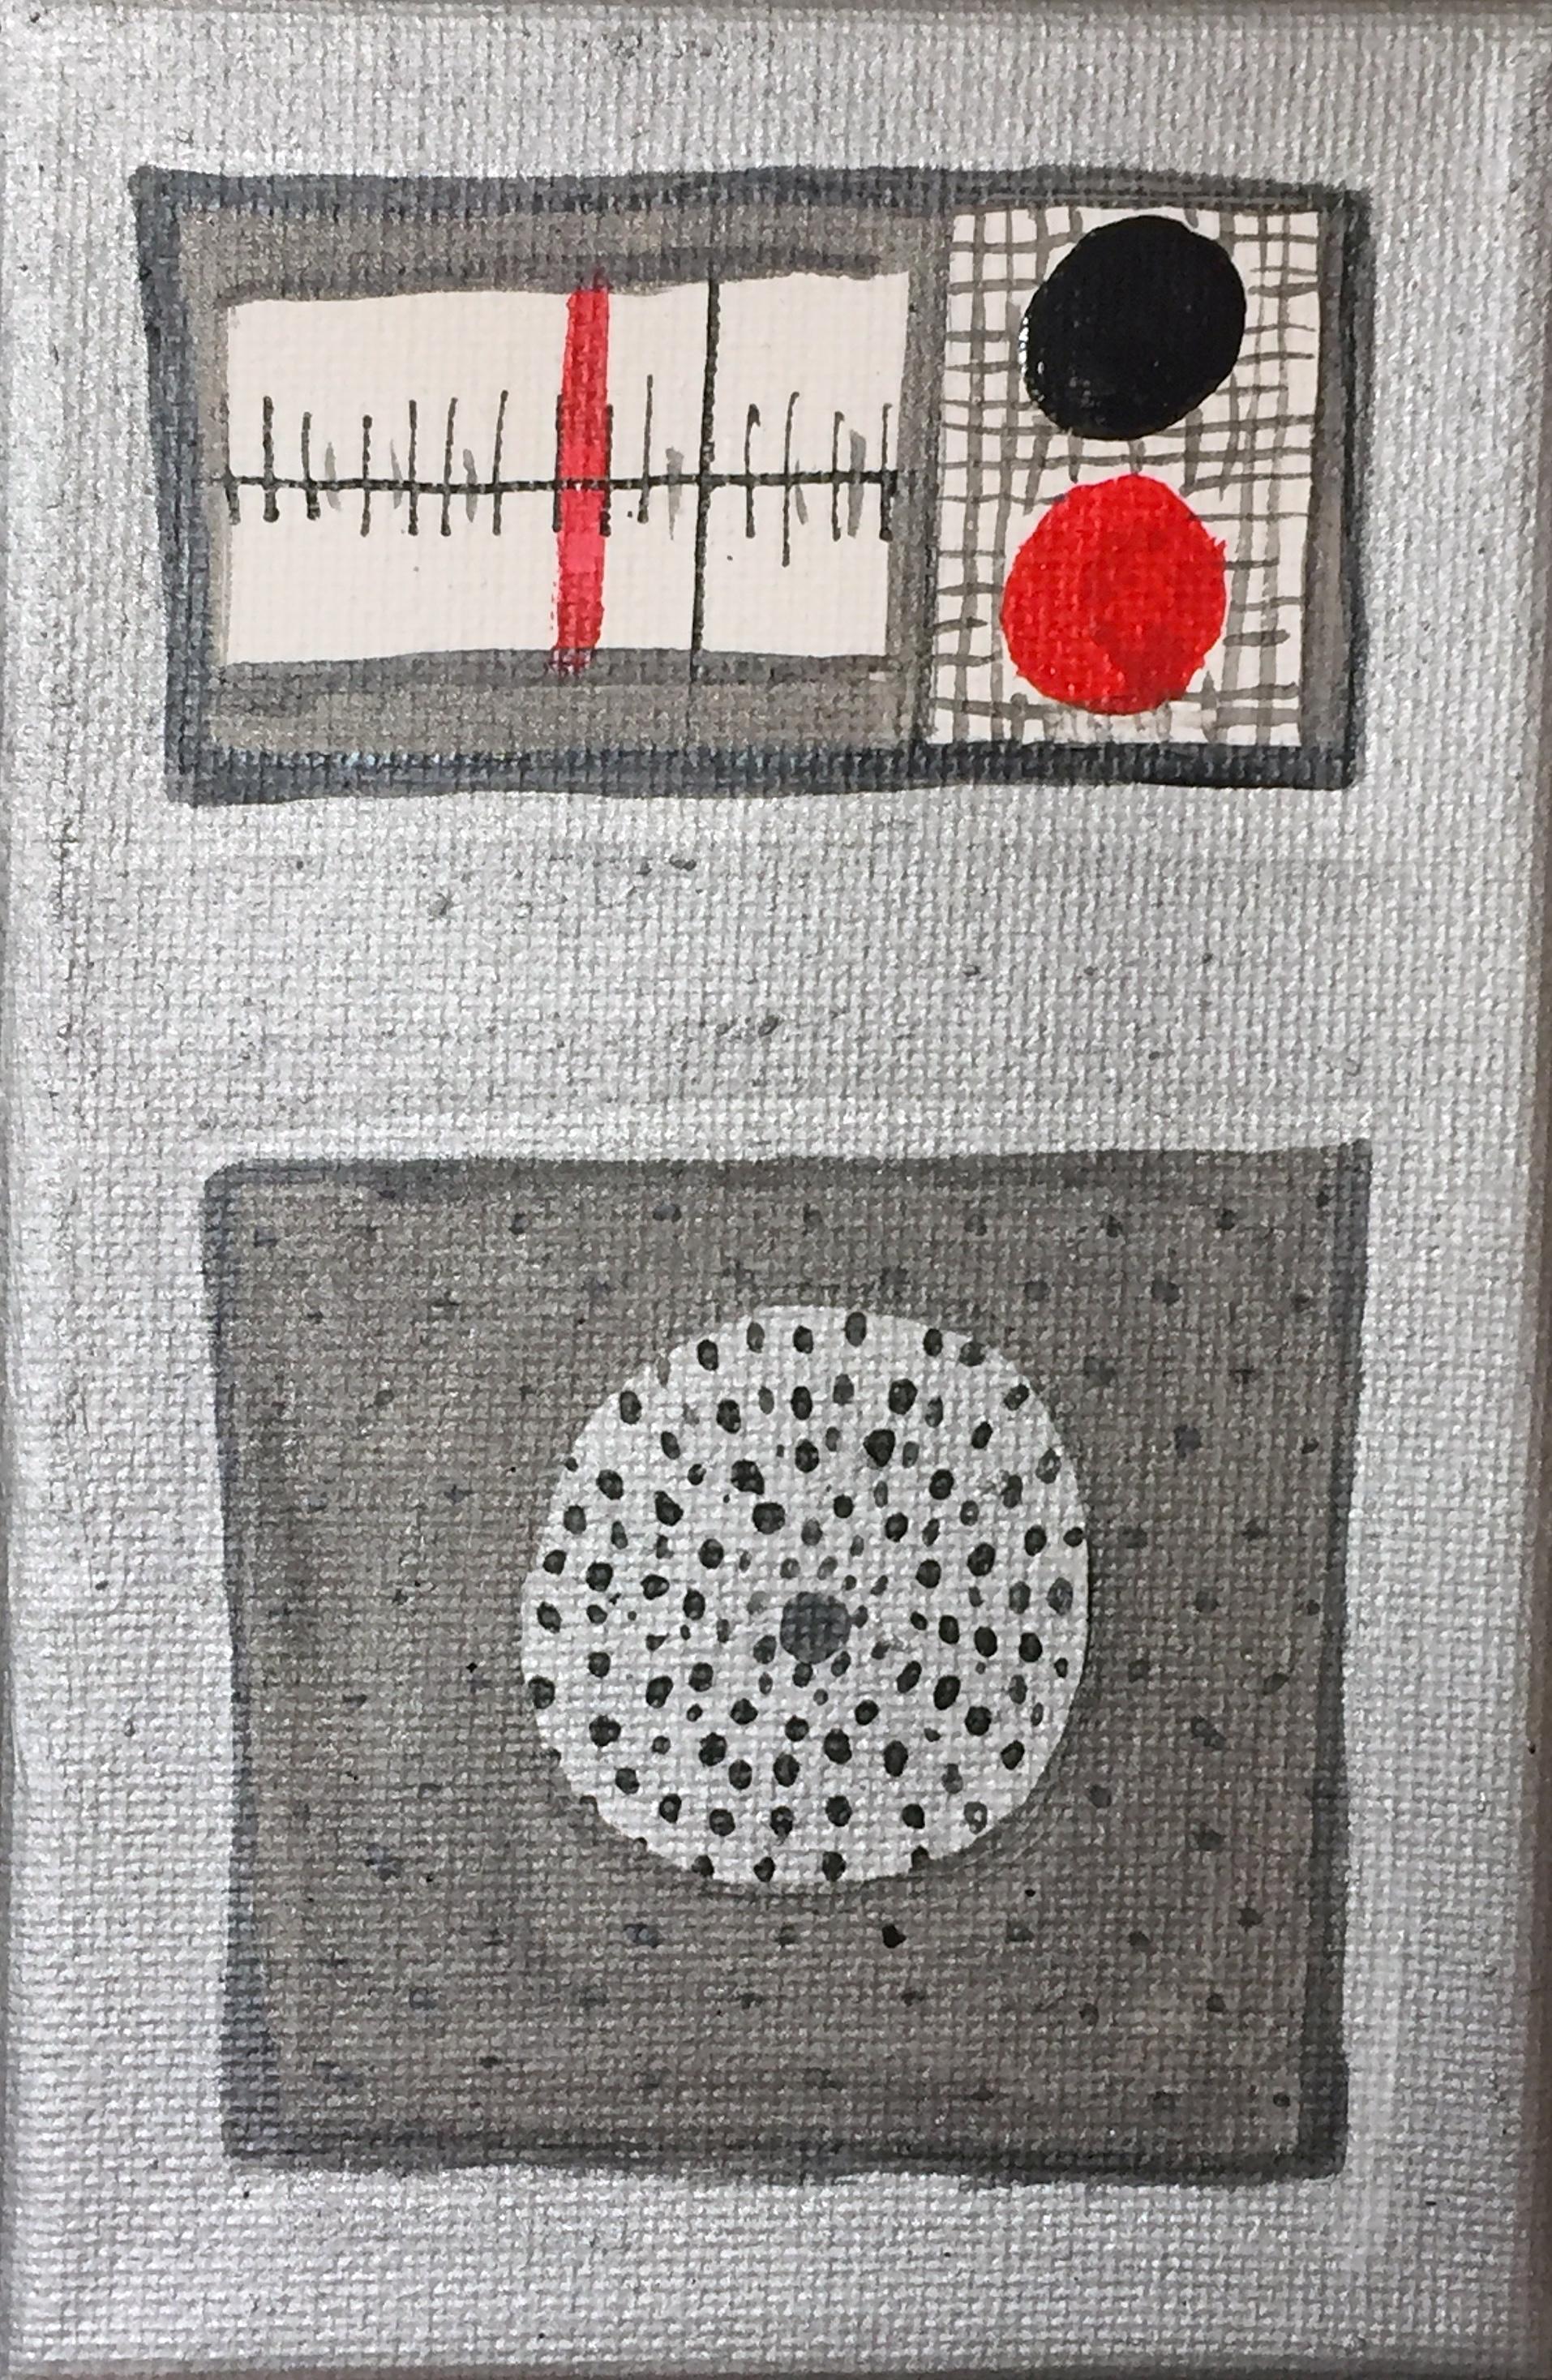 I've been making these "radio paintings" for about 20 years. I love music and I was thinking about music related objects- like the platinum records "as a decorative object" hanging in a friend's home. The face of radios and devices with knobs and